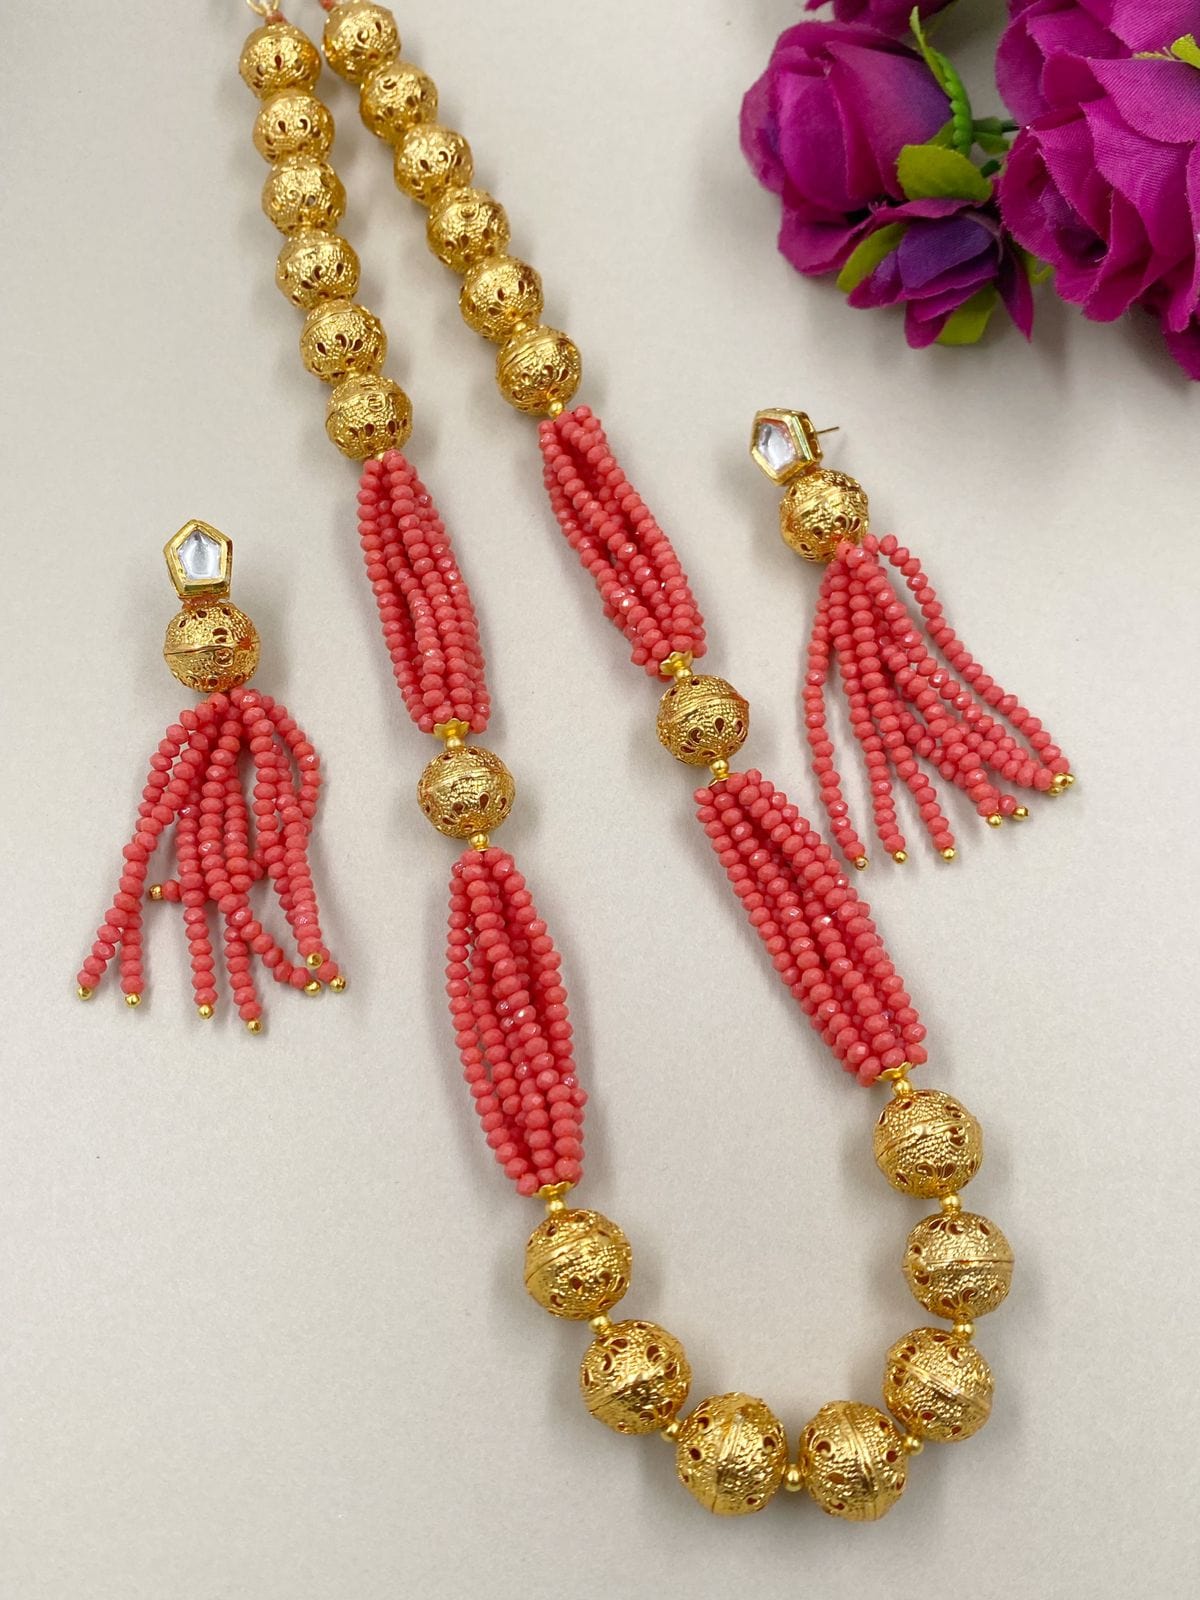 Fancy Peach Crystal And Golden Beads Necklace For Woman By Gehna Shop Beads Jewellery